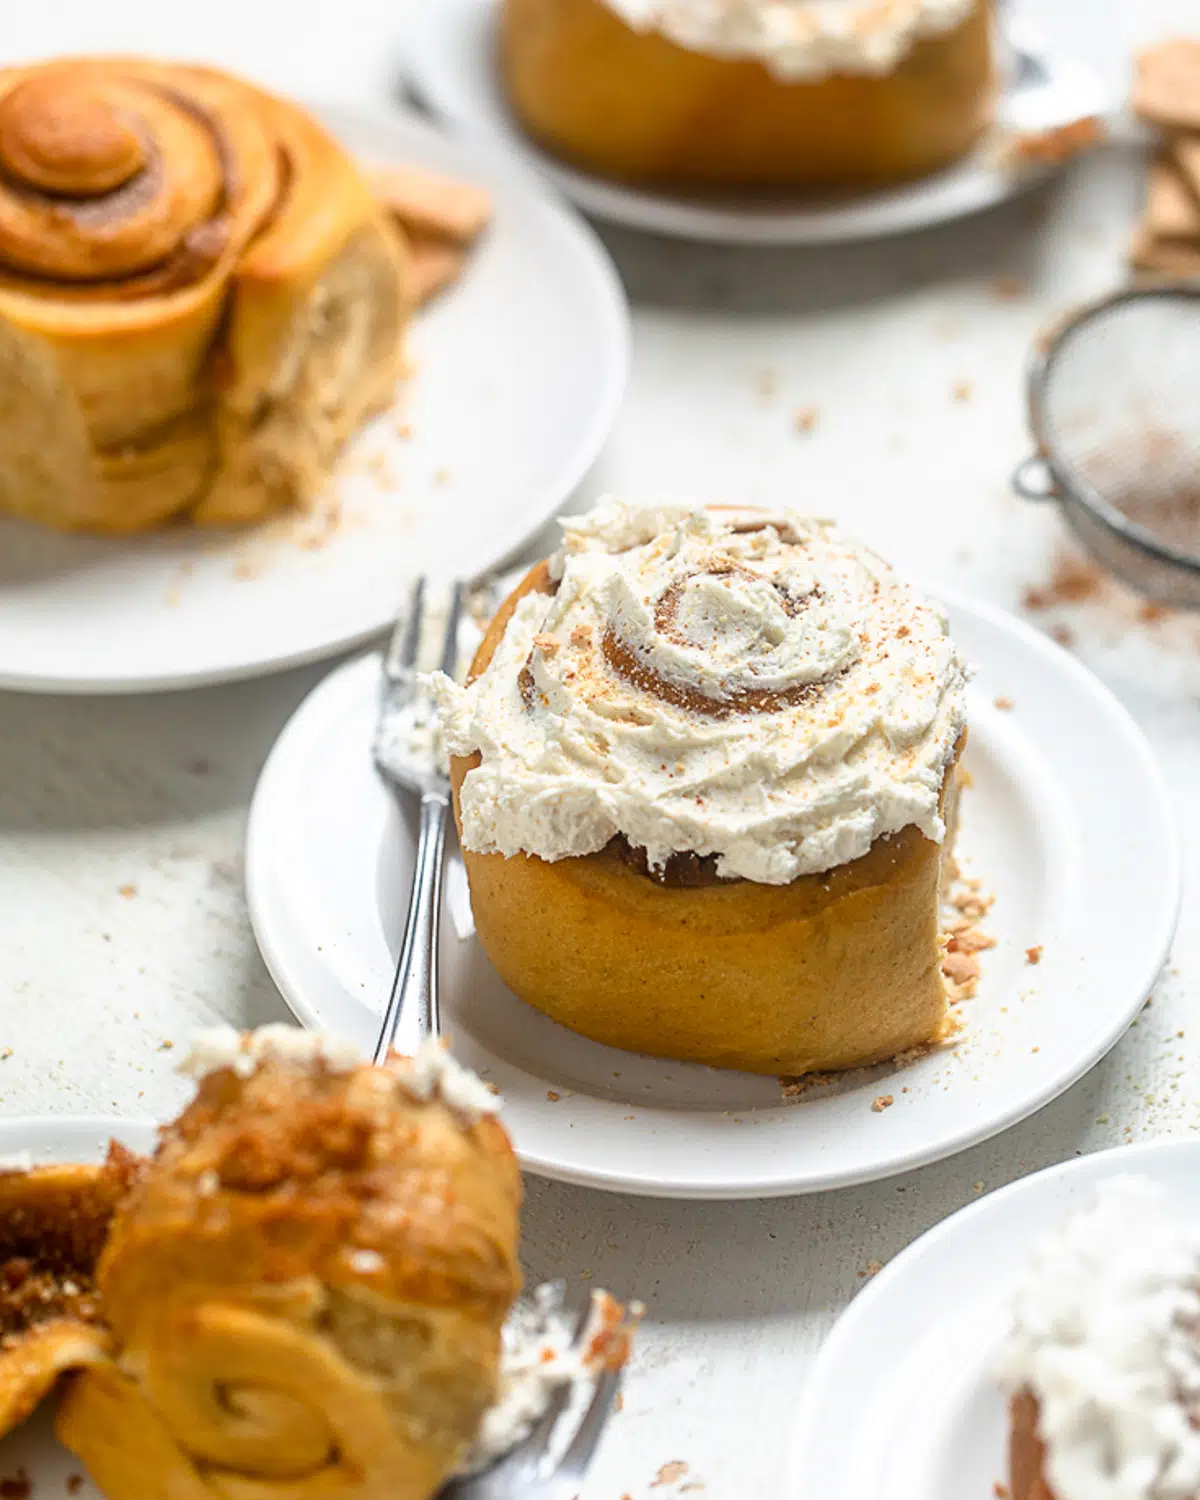 iced vegan cinnamon rolls with sweet potato filling on a plate.